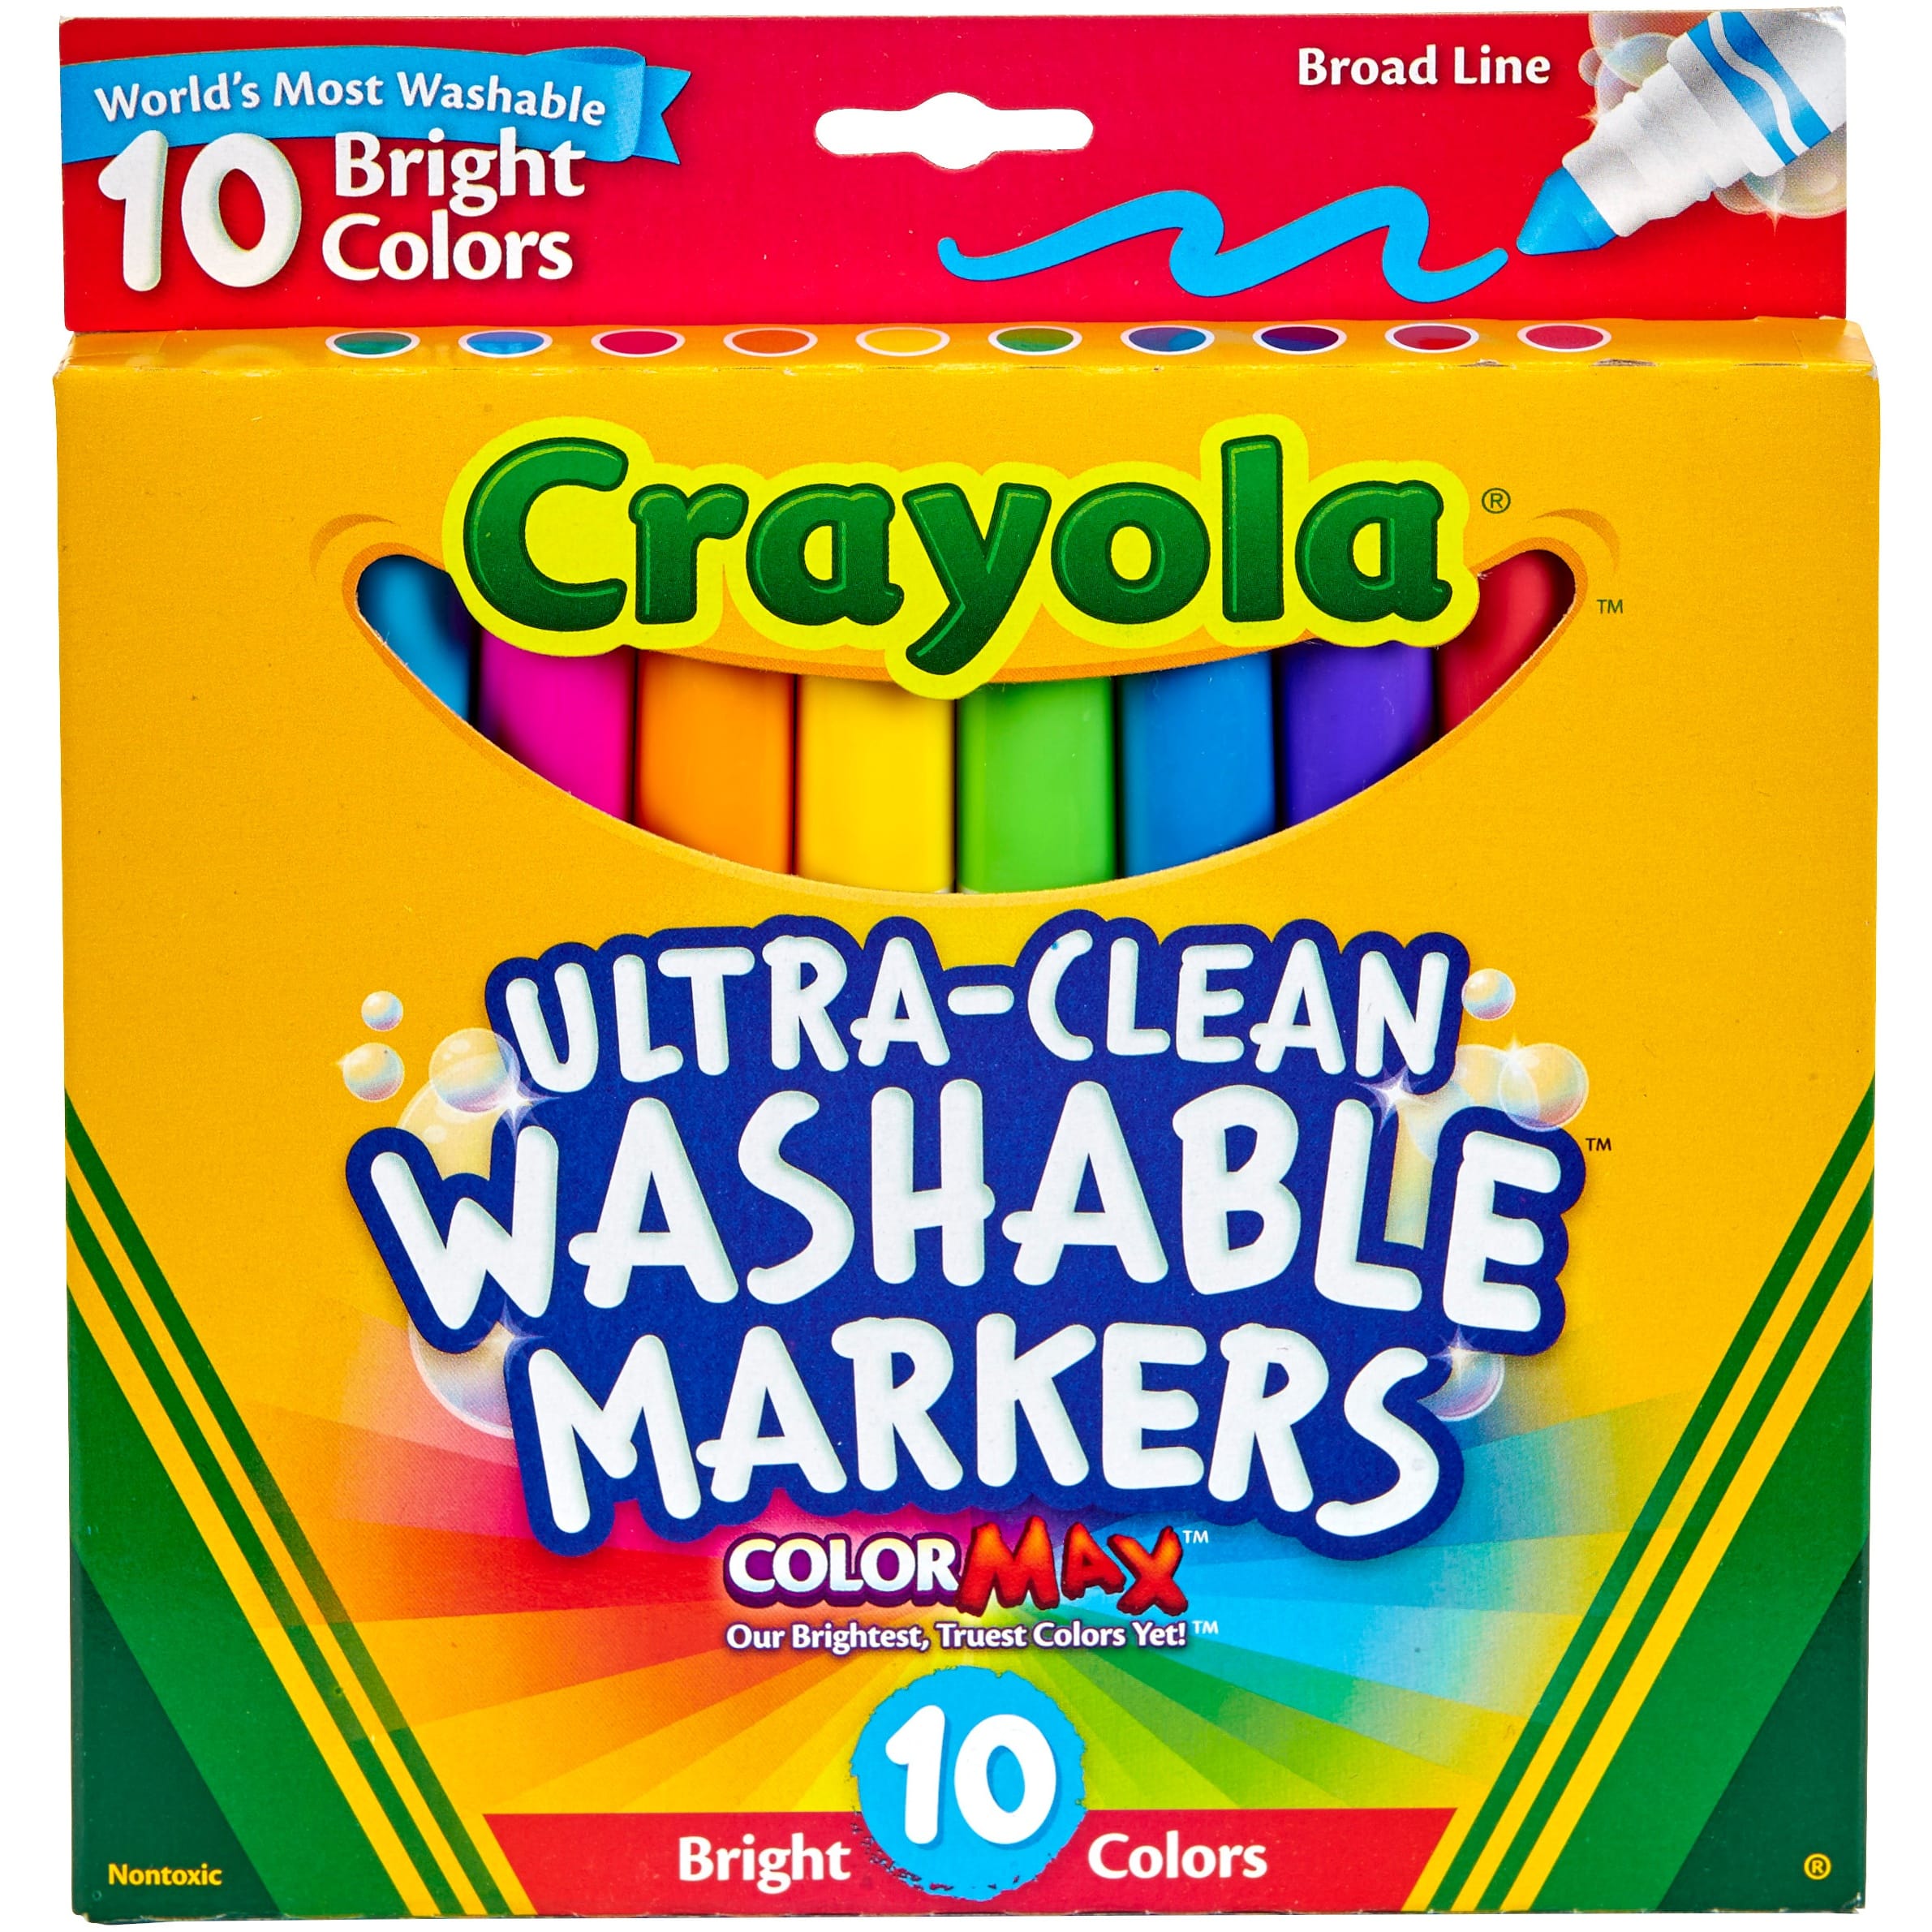 Crayola® Ultra-Clean Washable™ Color Max™ Broad Line Bright Markers